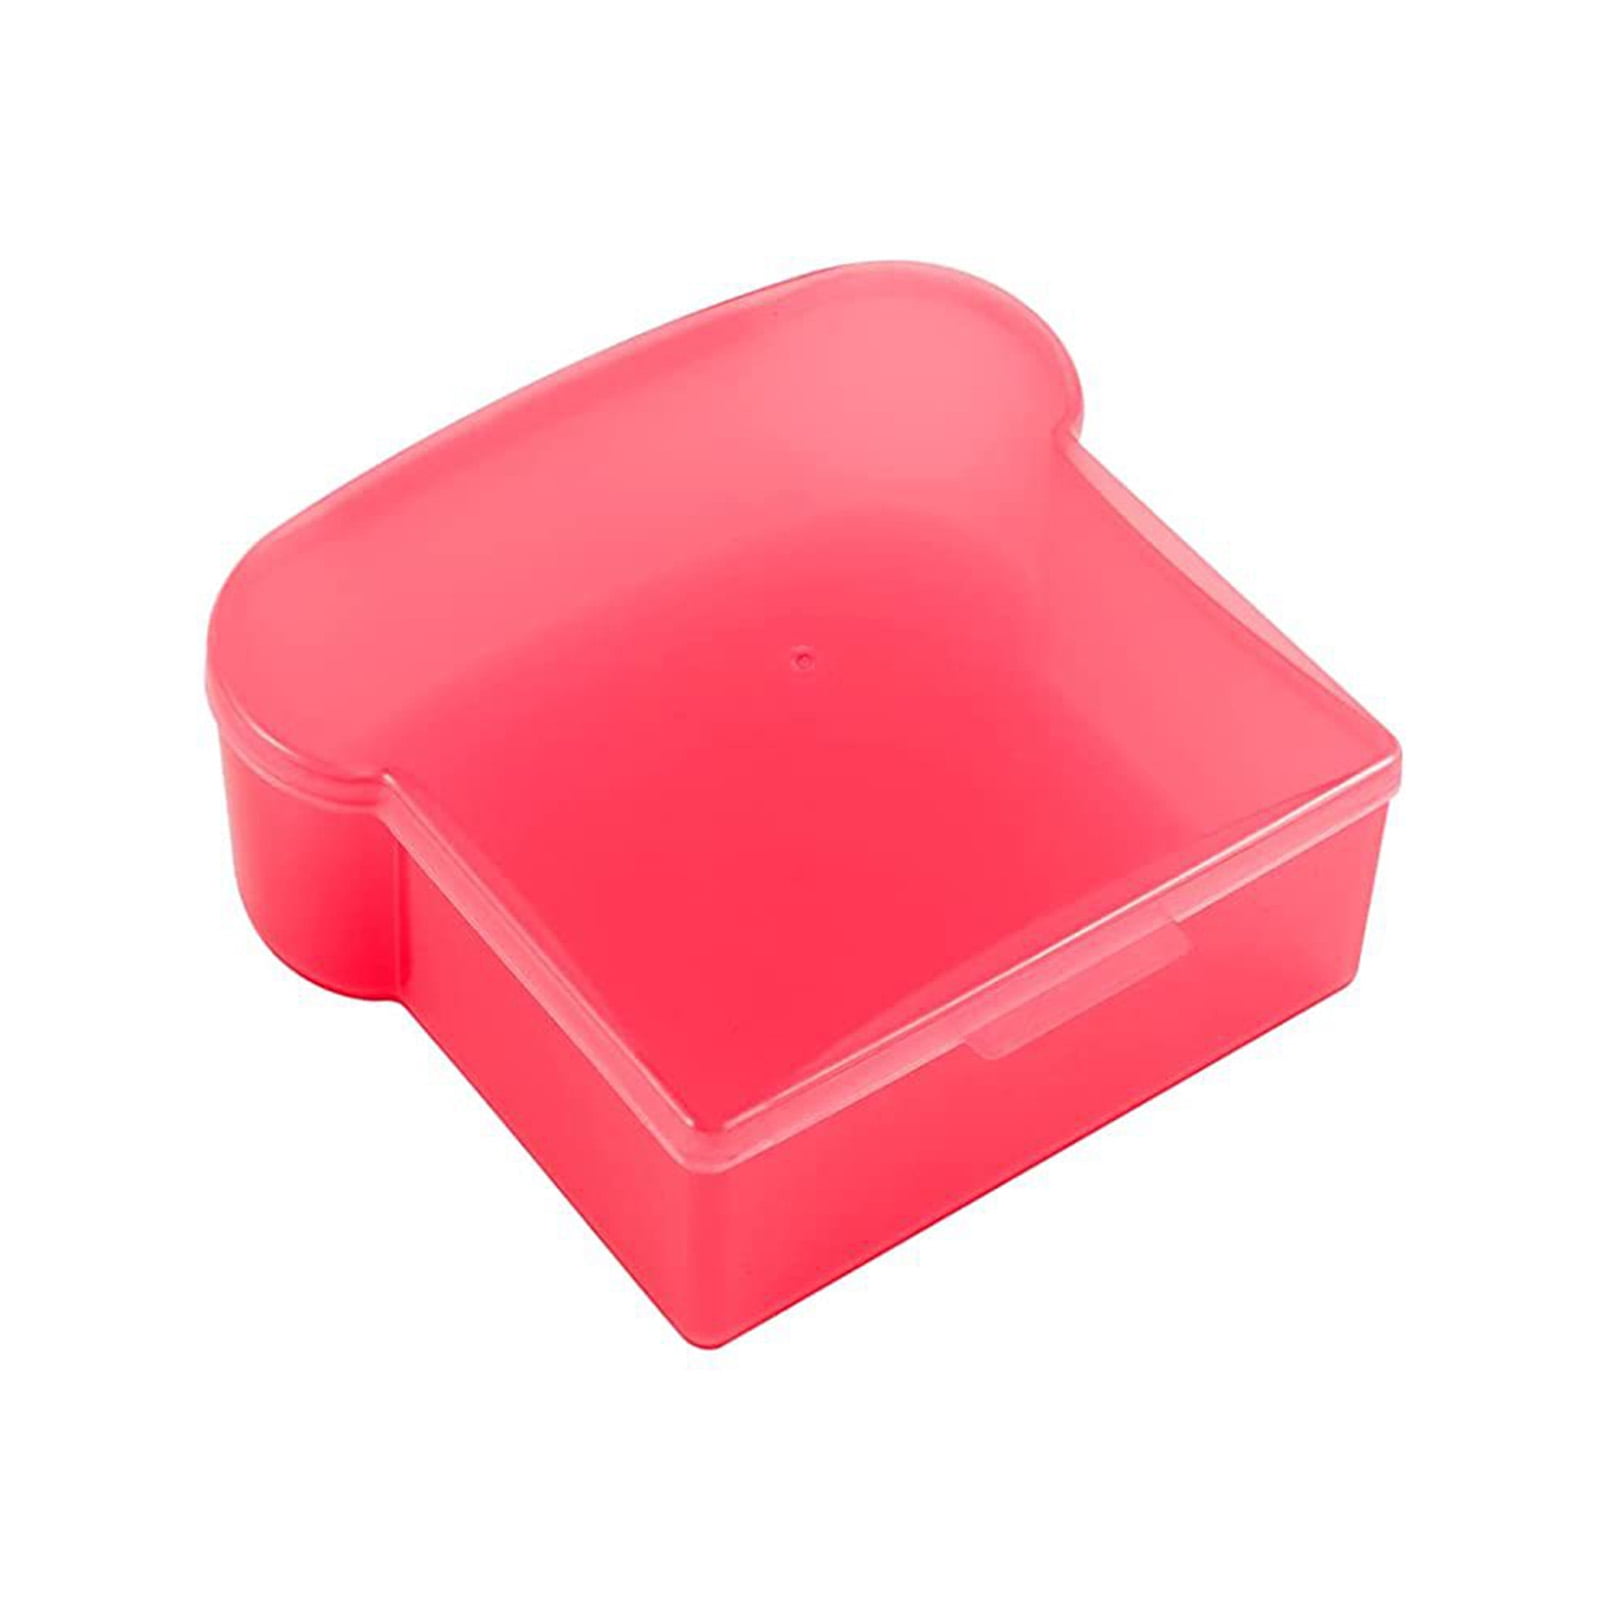 Food Storage Sandwich Containers, Toast Storage Box with Easy-locking Clips Great for Meal Prep. Kids Adult Lunch Box - Reusable, Size: 6.1 x 5.9 x